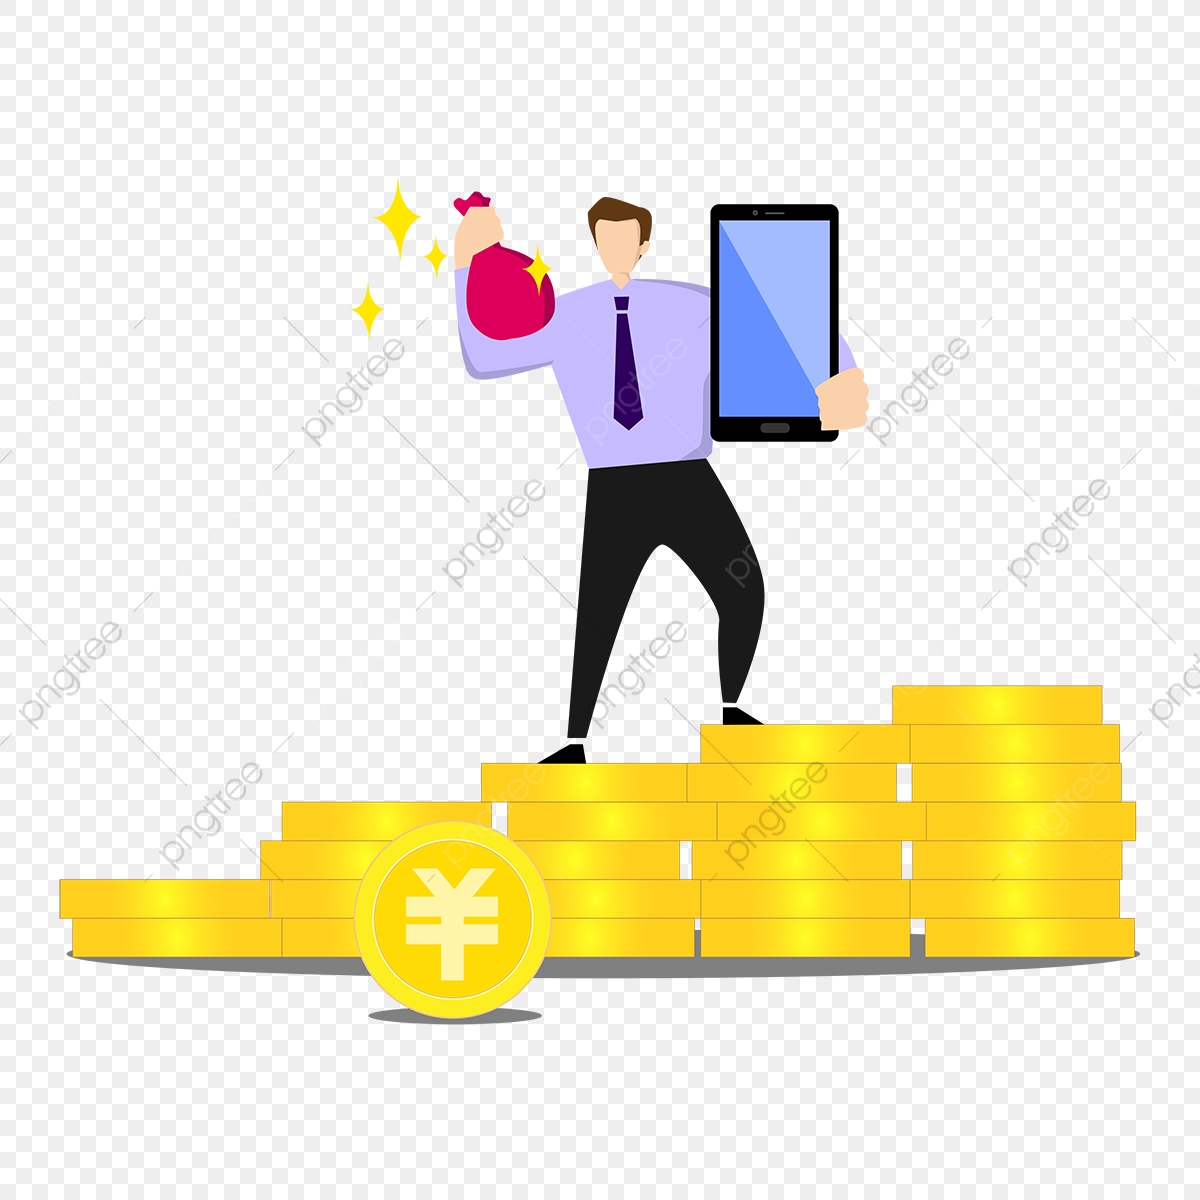 economy clipart copyrighted